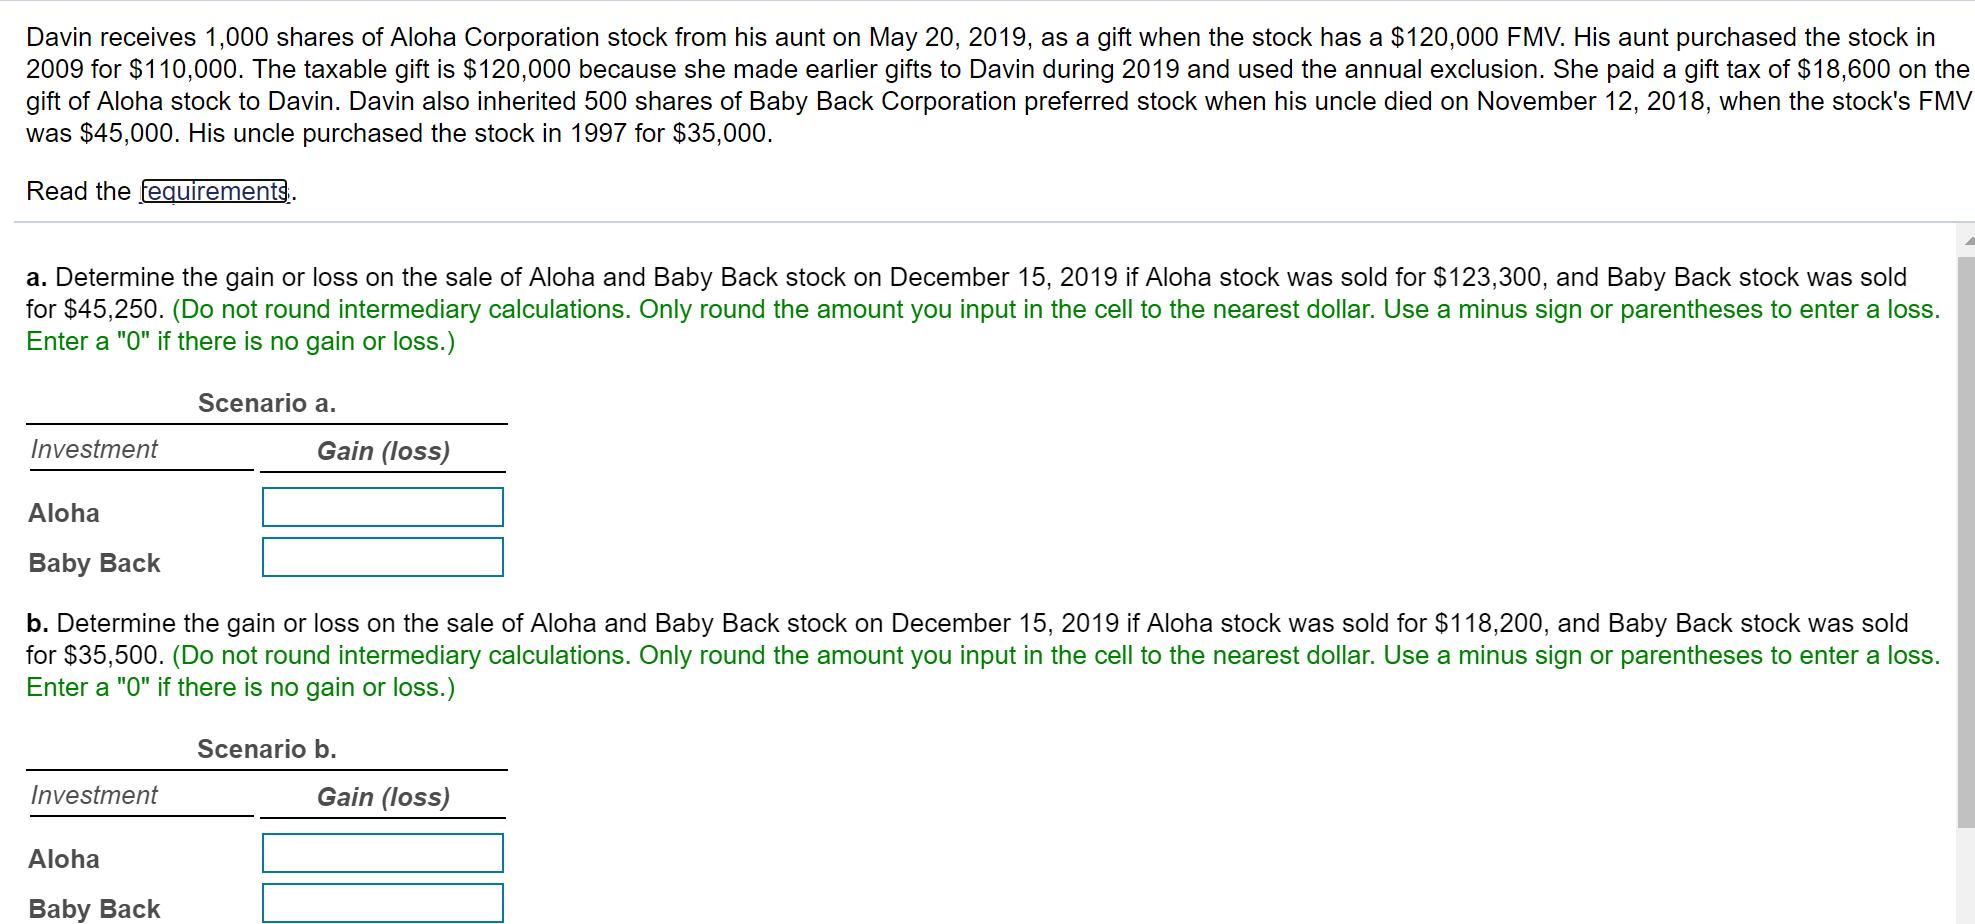 Davin receives 1,000 shares of Aloha Corporation stock from his aunt on May 20, 2019, as a gift when the stock has a $120,000